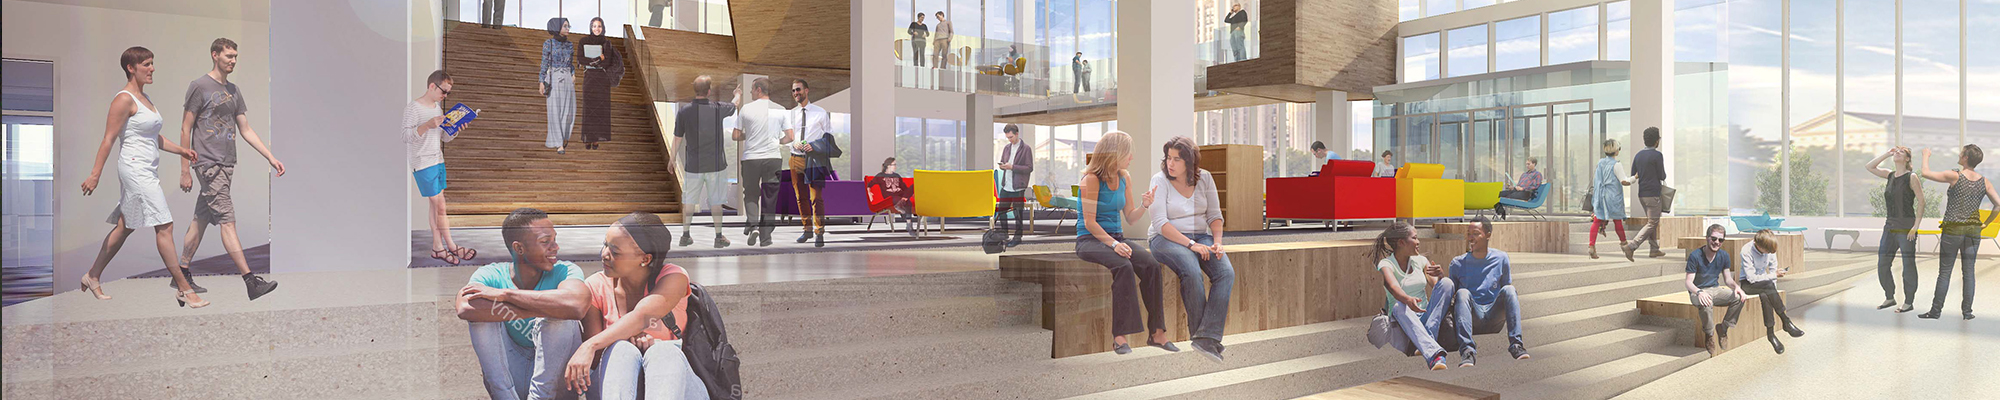 Proposed Hillman Library Ground Floor View